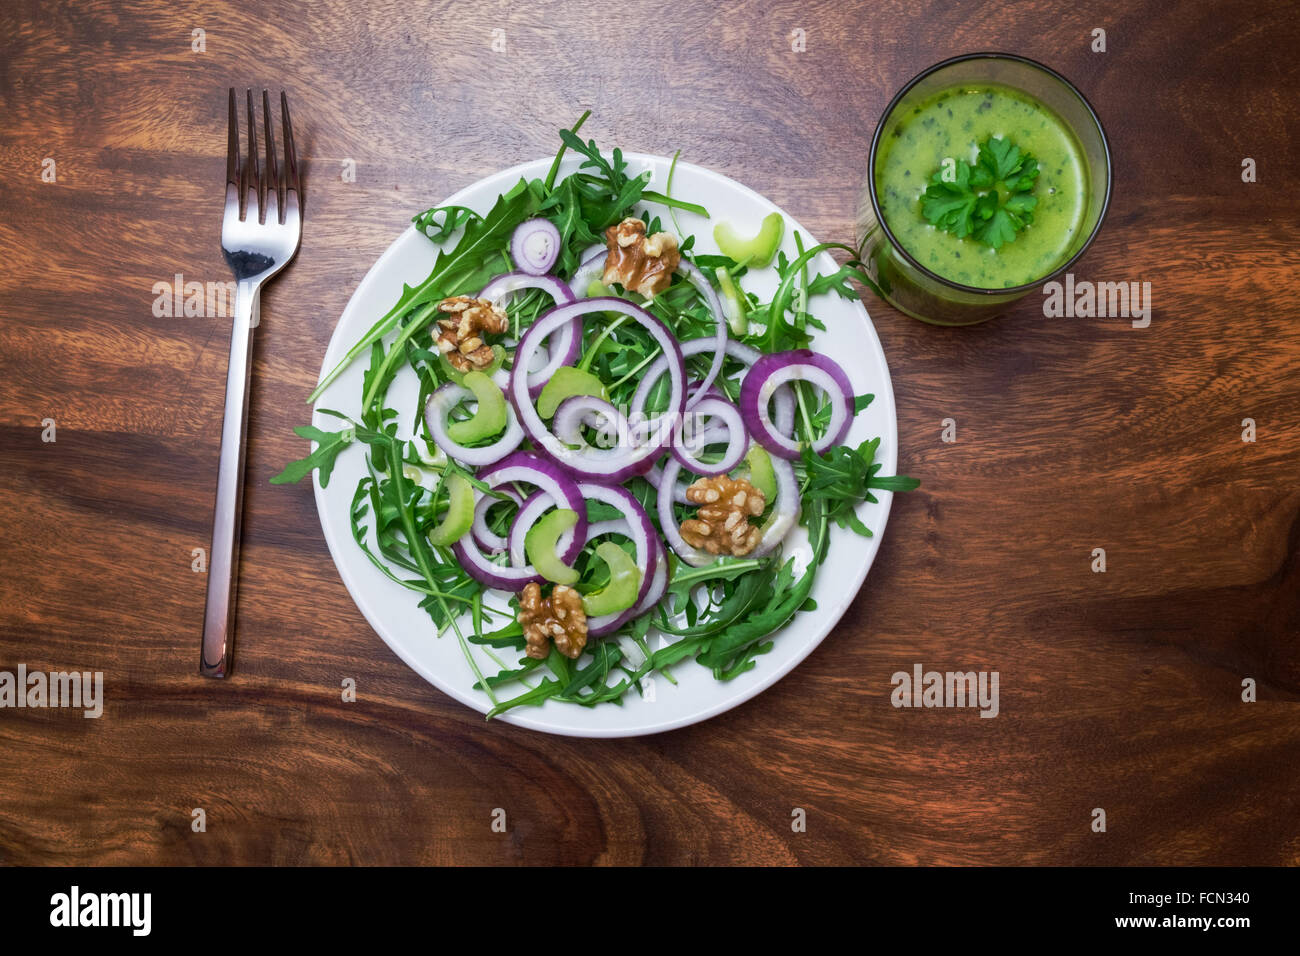 Salad and green smoothie made of sirtfoods, foods which activate sirtuin Stock Photo